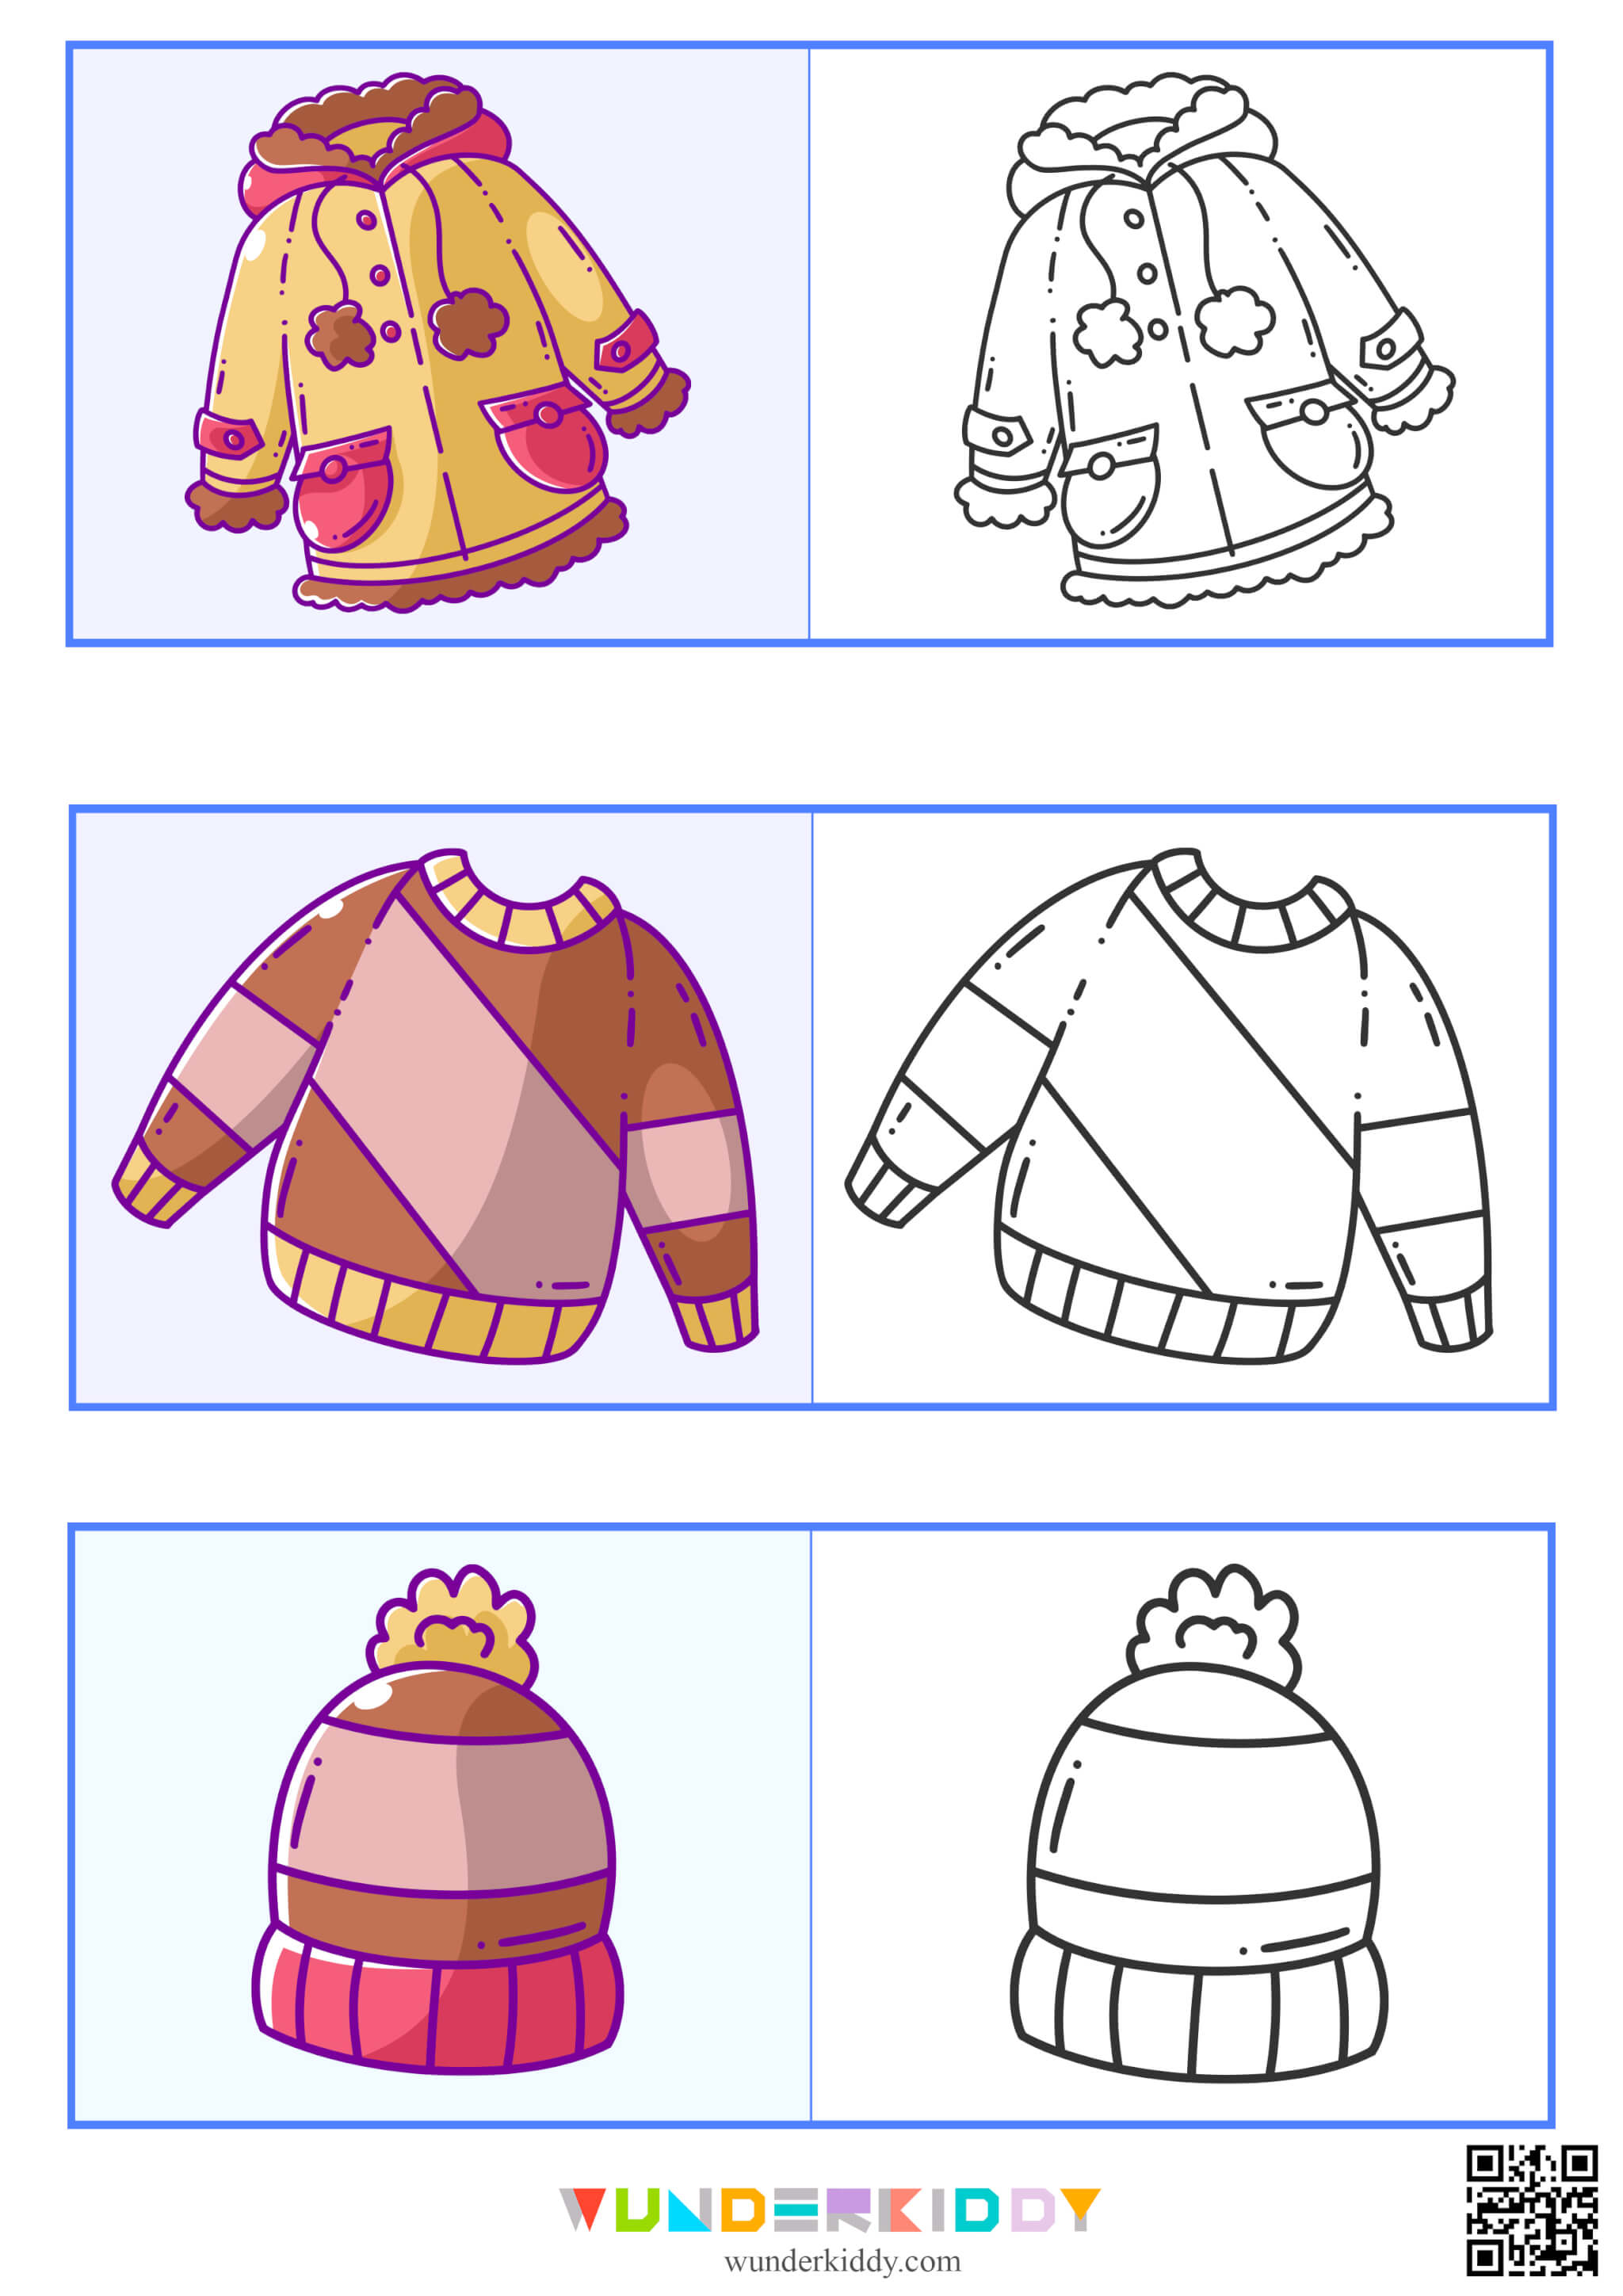 Winter clothes for children 5 6 years old #1